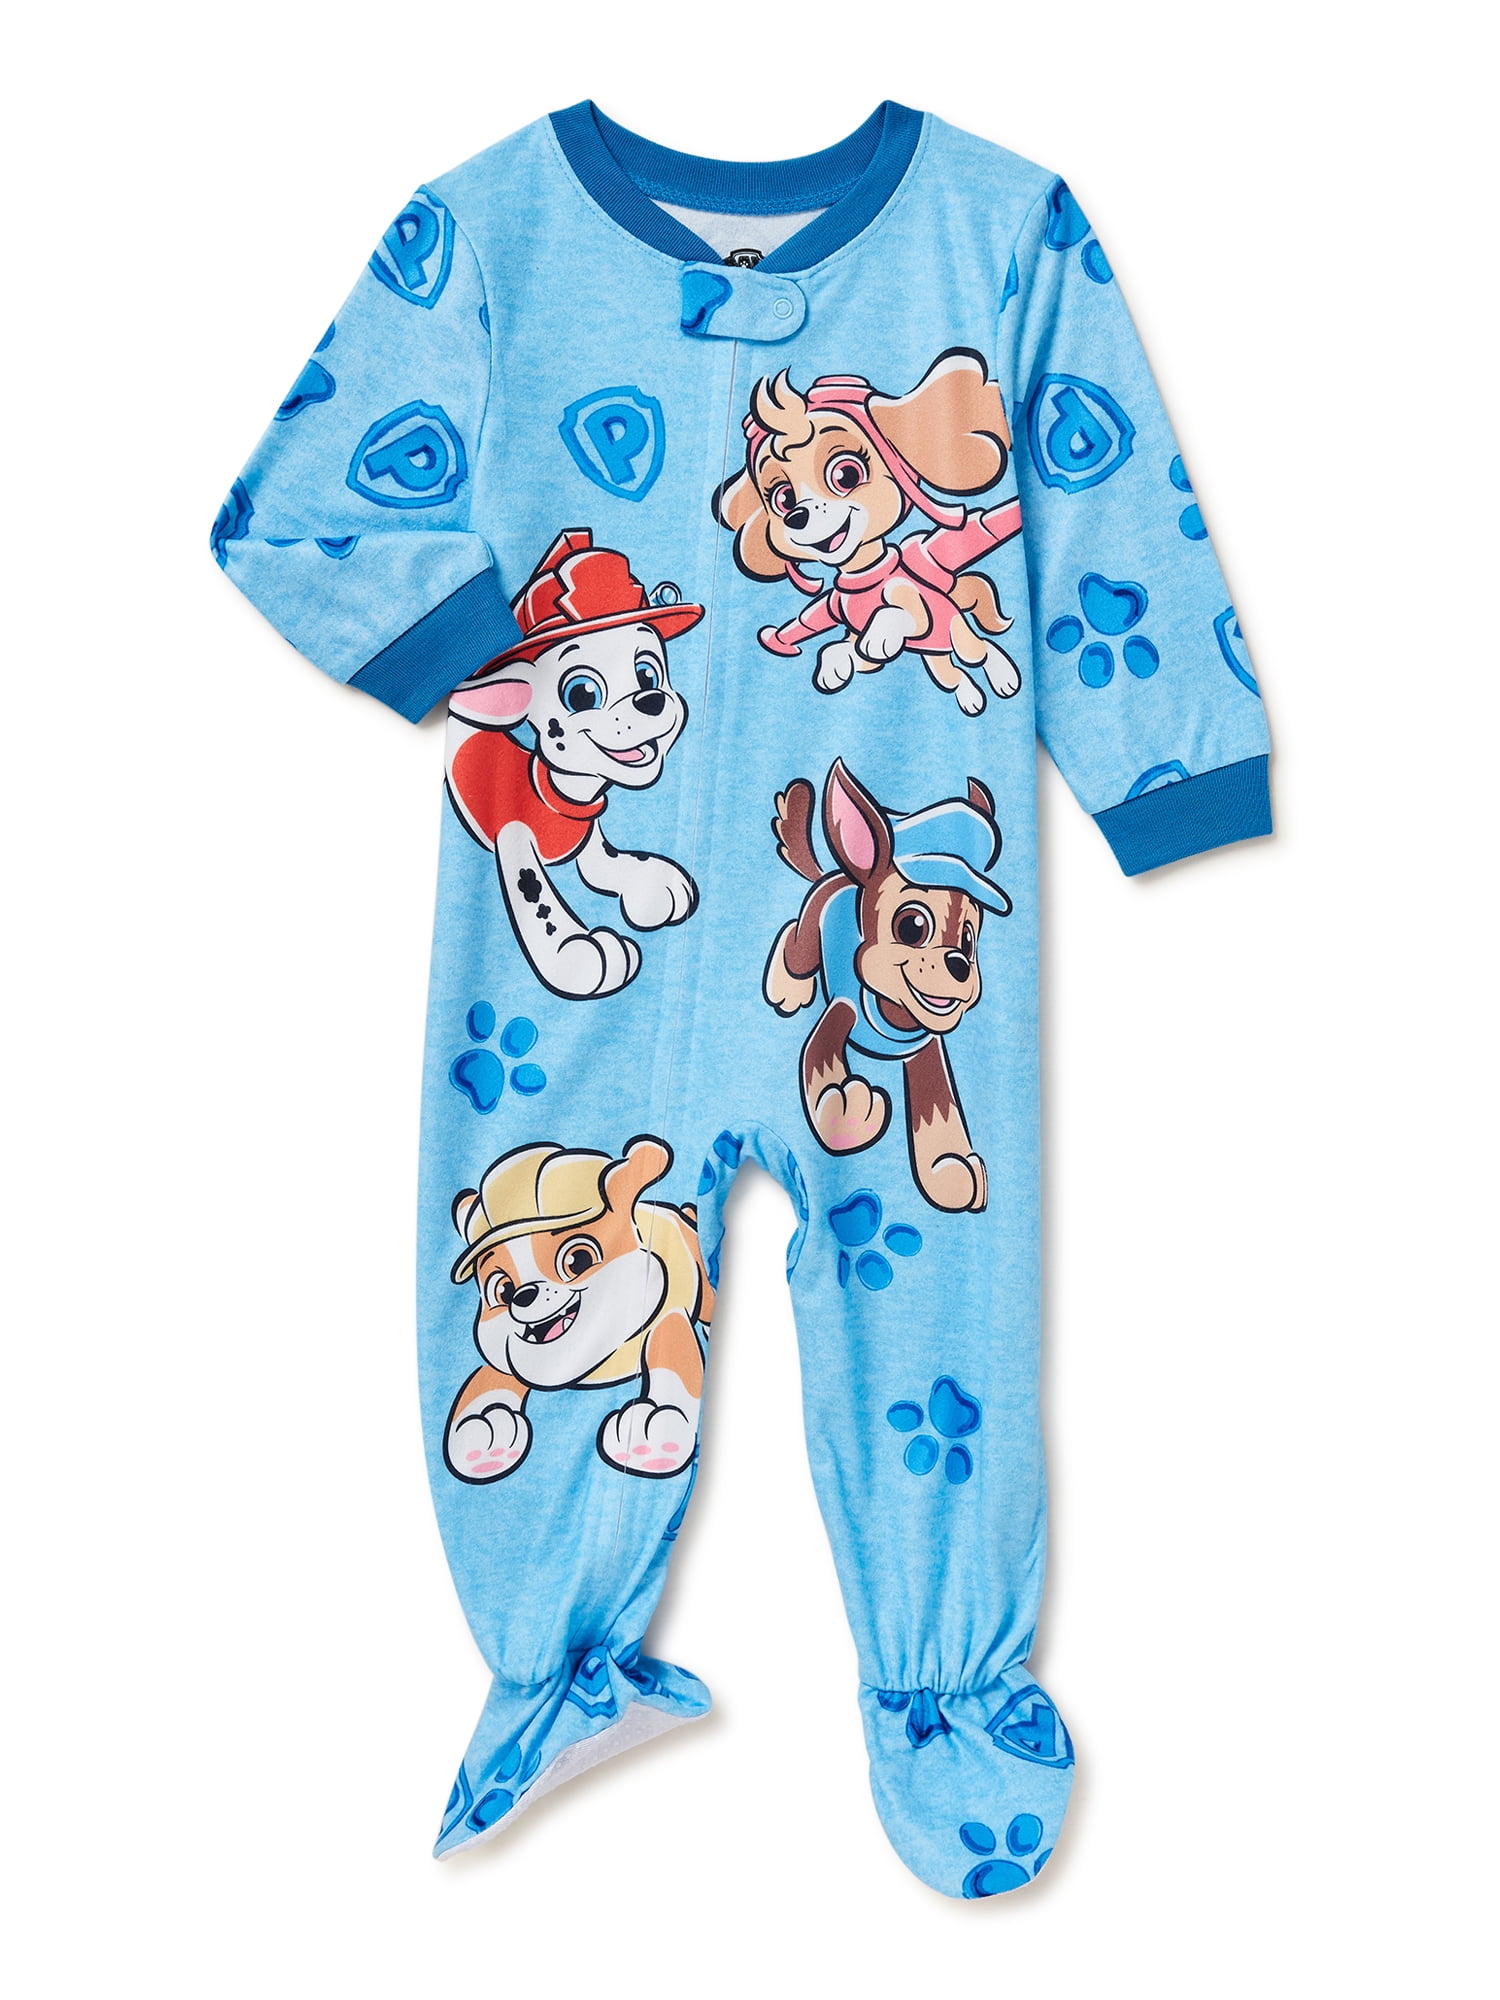 Paw Patrol Boys Onesie Sleepsuit Ages 18 Months to 5 Years Blue 